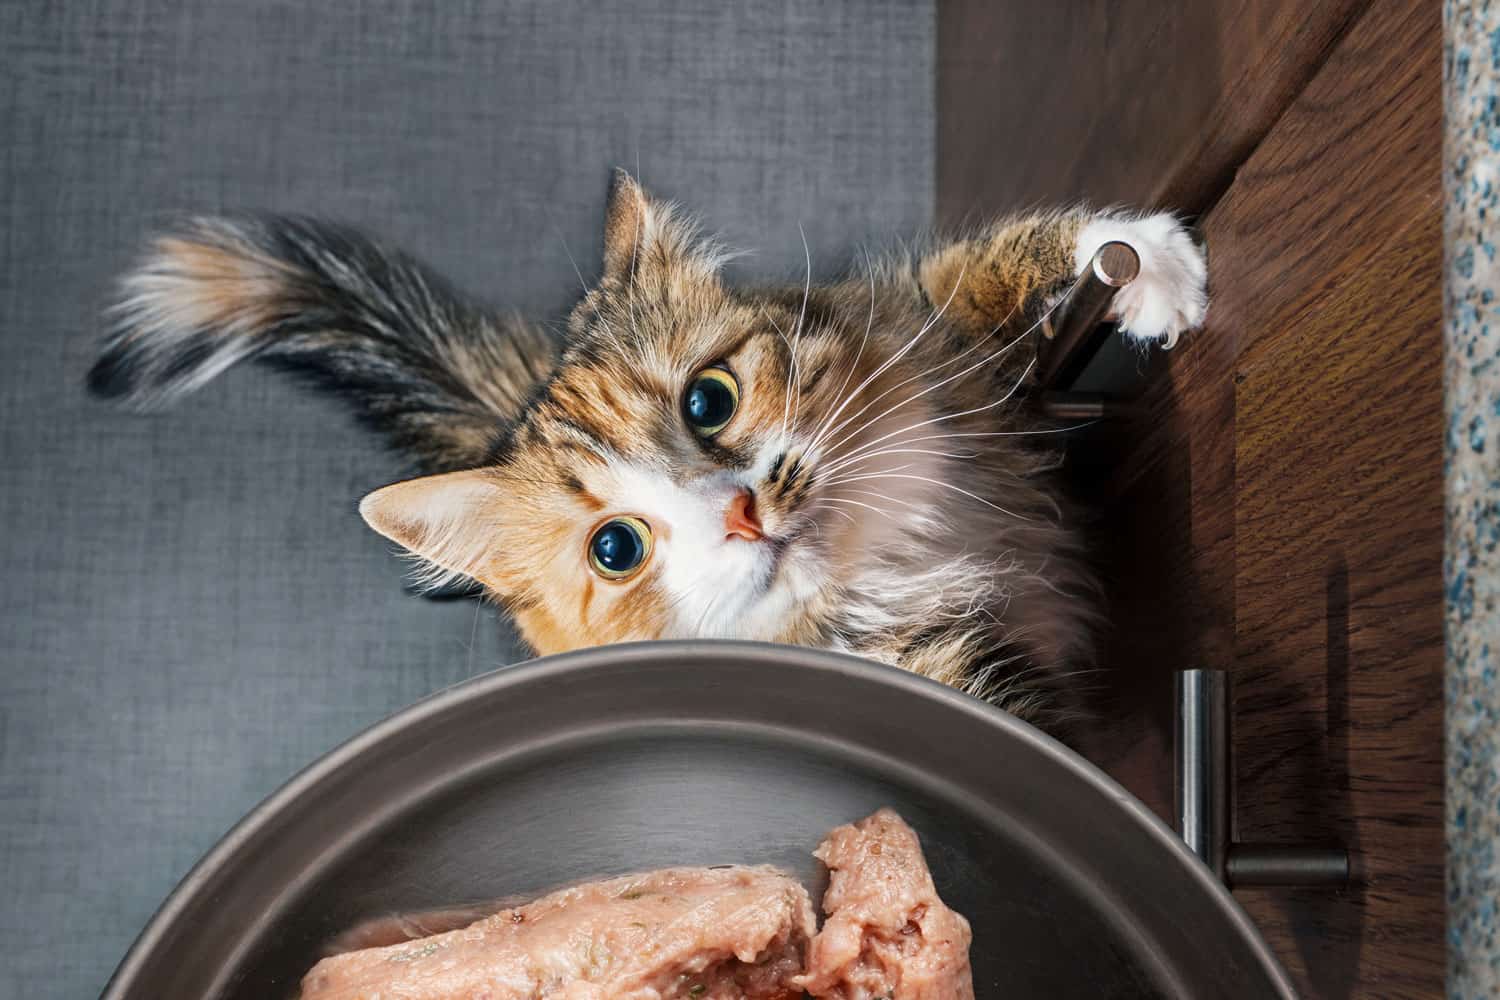 Top view of desperate cat trying to get to a food bowl filled with ground chicken meat. The cat is standing on the hind legs. Concept for raw food diet for cats or feeding time.